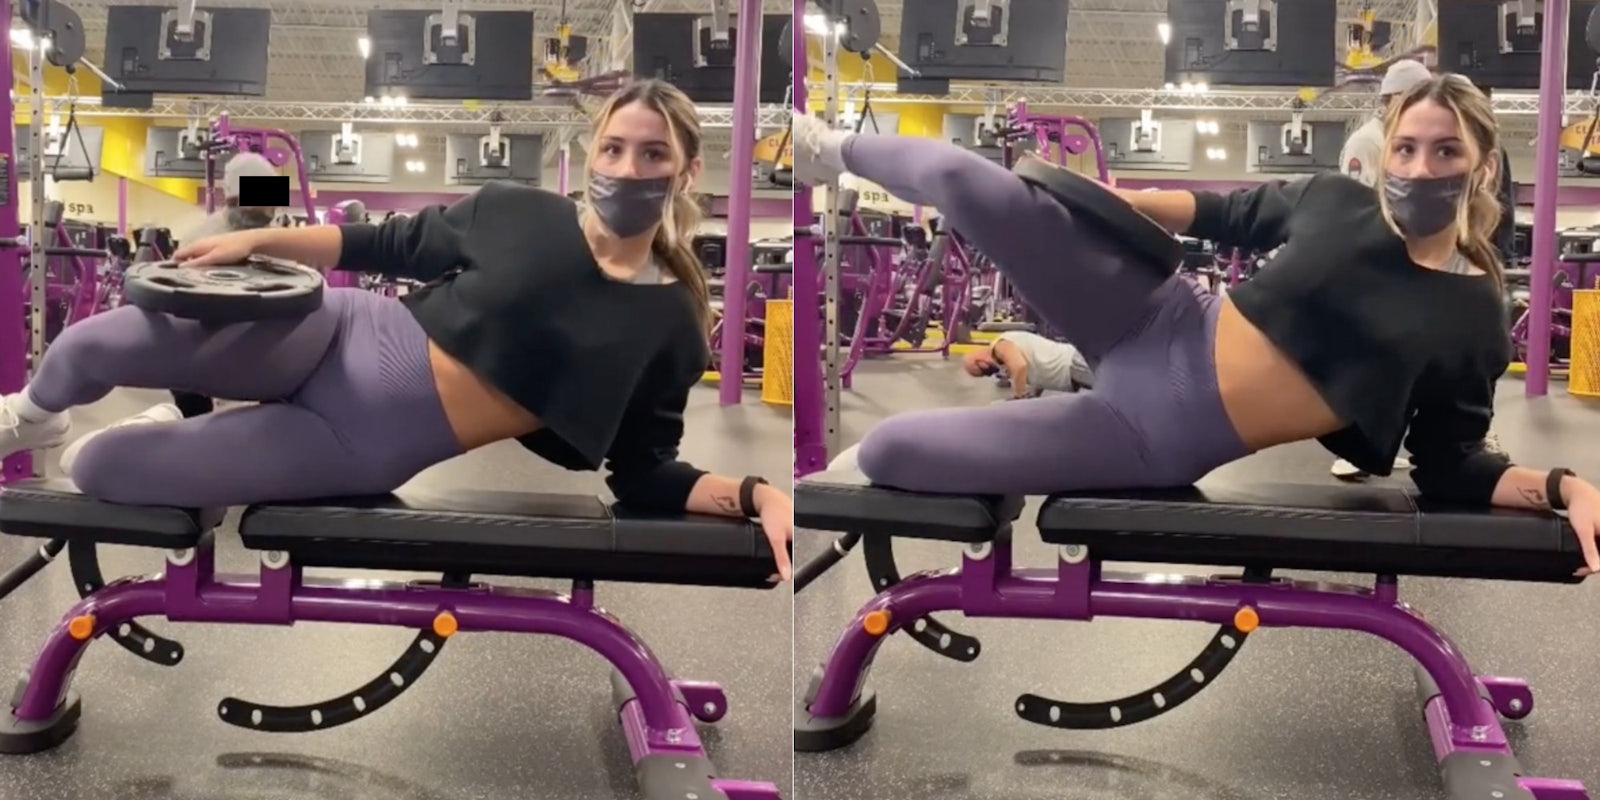 A TikTok user working out in the gym